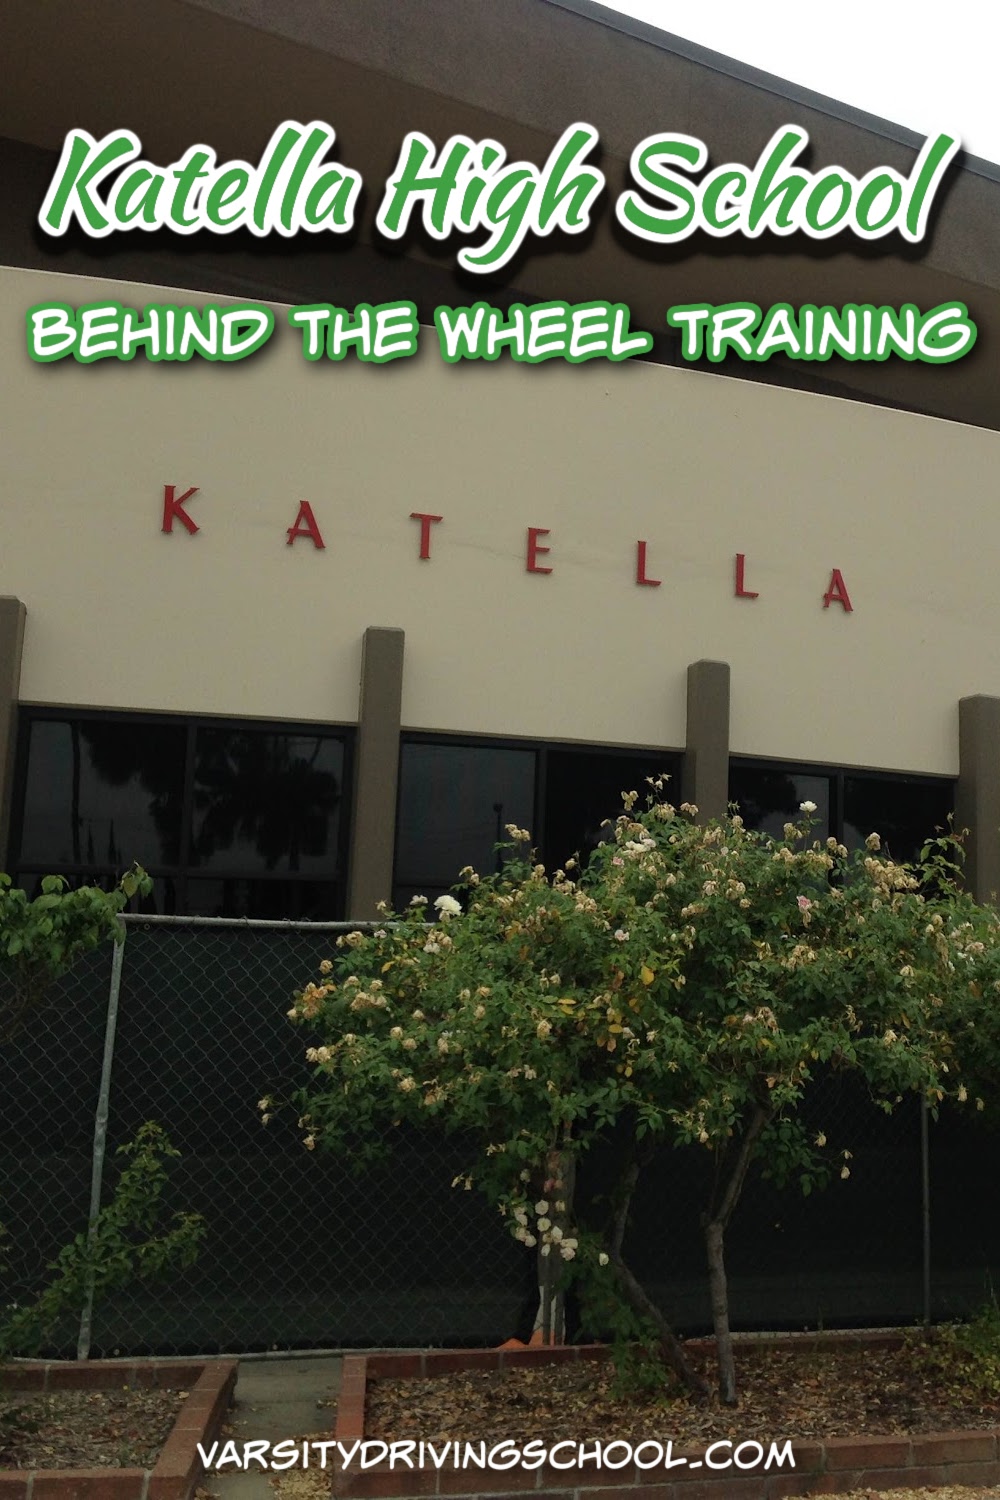 Varsity Driving School offers students the best Katella High School behind the wheel training that helps with more than just the basics.